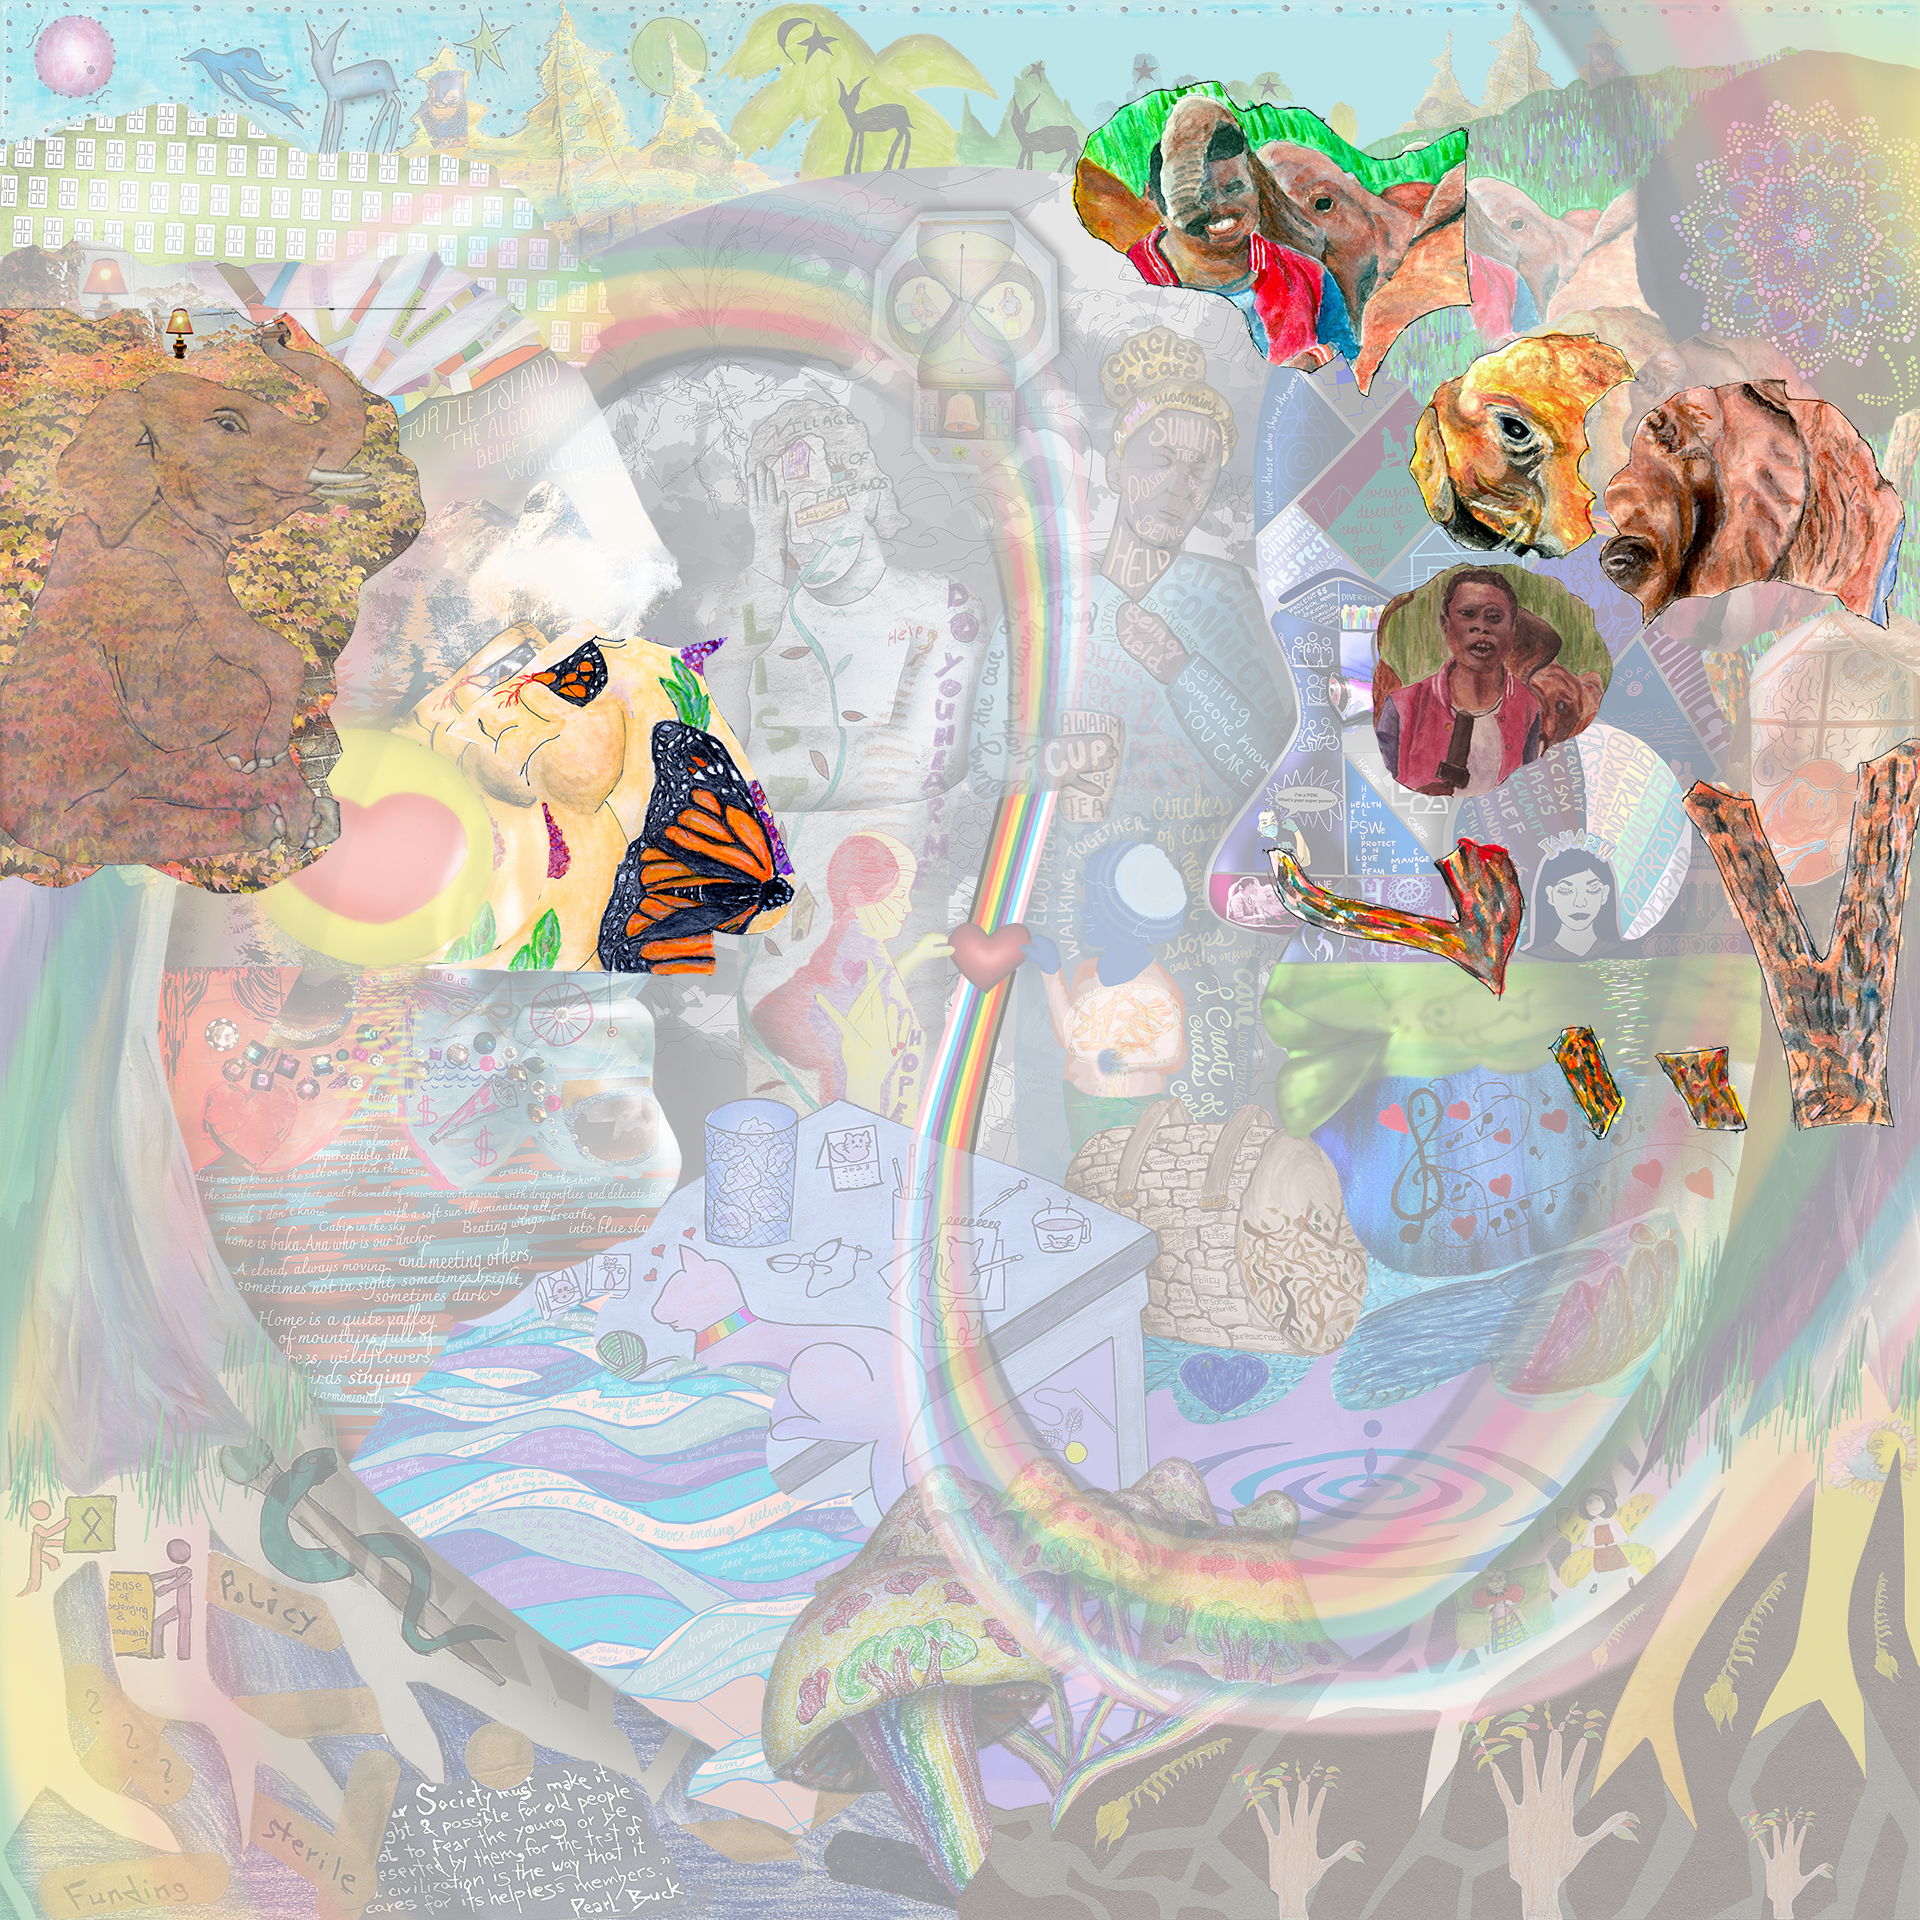 This layer depicts Jesse's artwork. The first segment shows multiple instances of an elephant in warm red and orange colors, one with a laughing man. The second segment is of an orange and black butterfly on the profile-view figure on the left of the image. The third segment shows various tree branches in multiple colors.